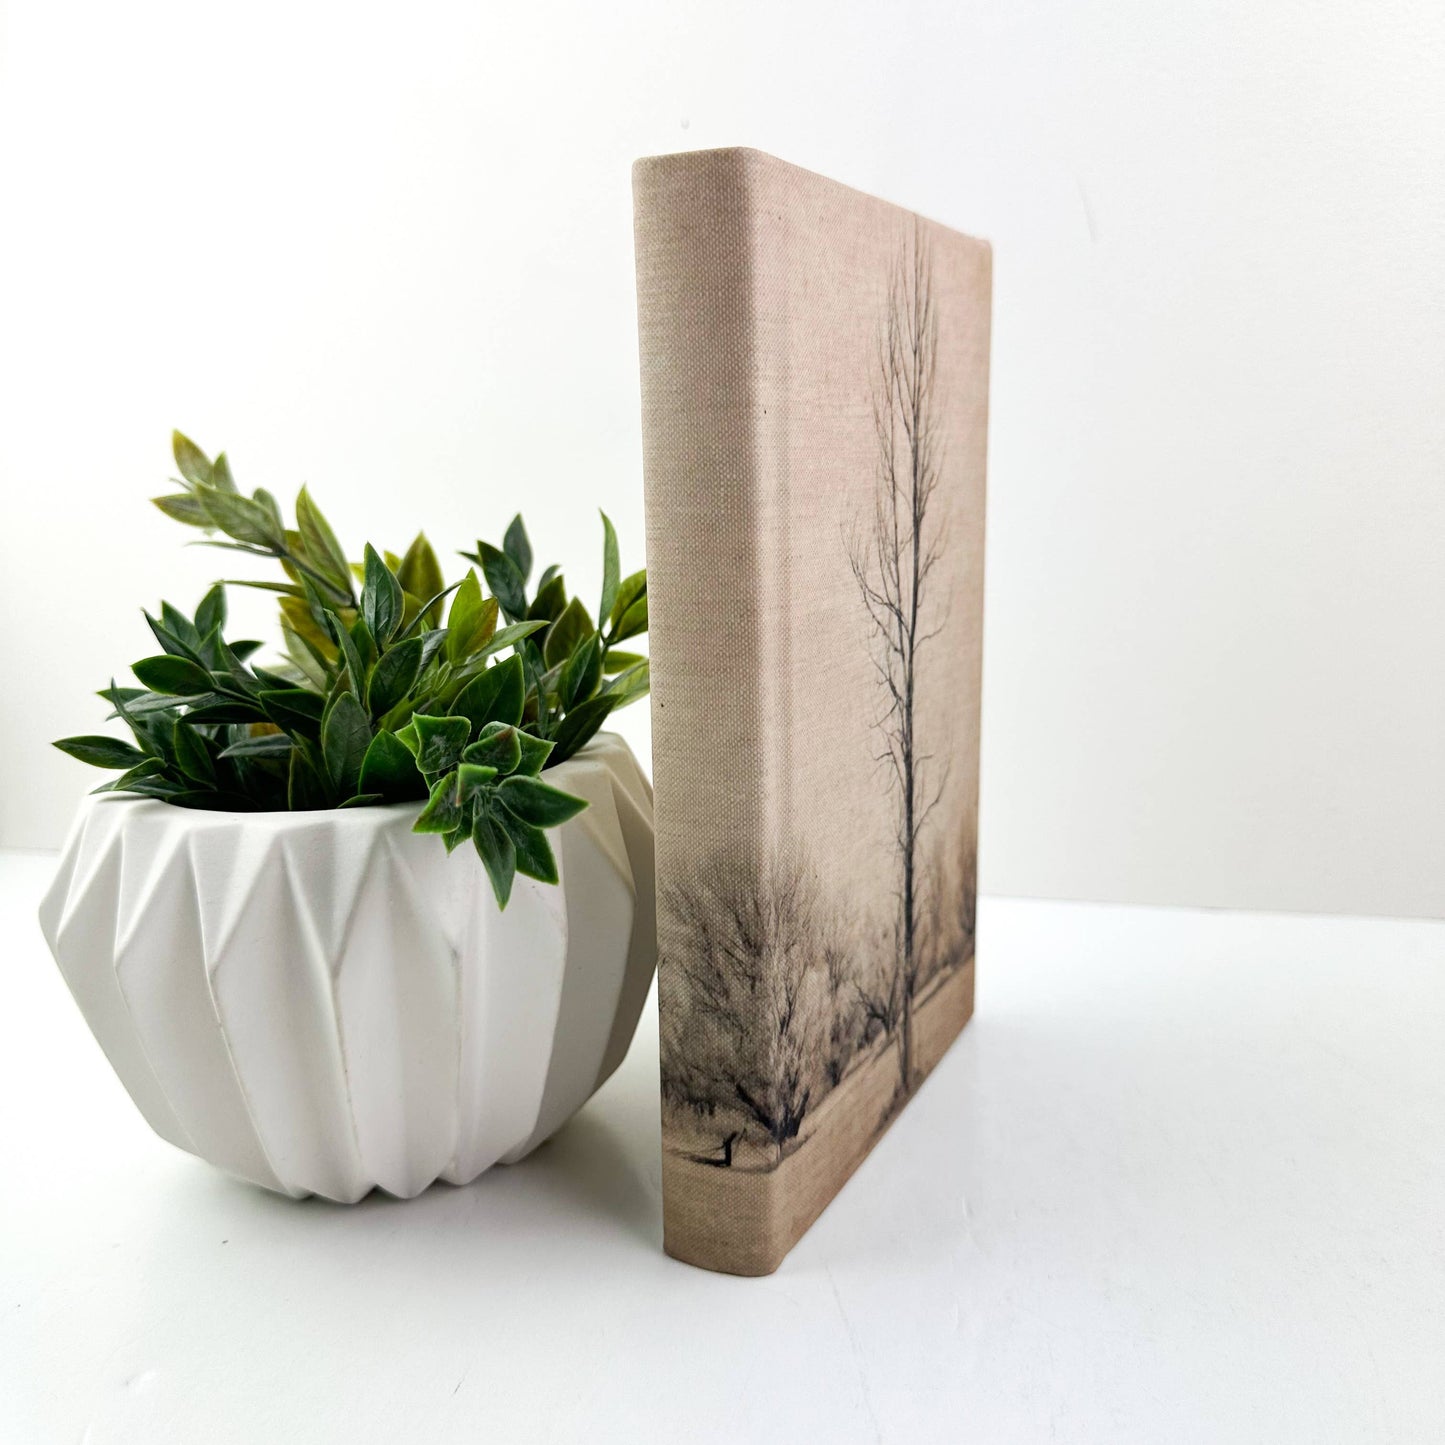 Wrapped Decorative Book with Tree.